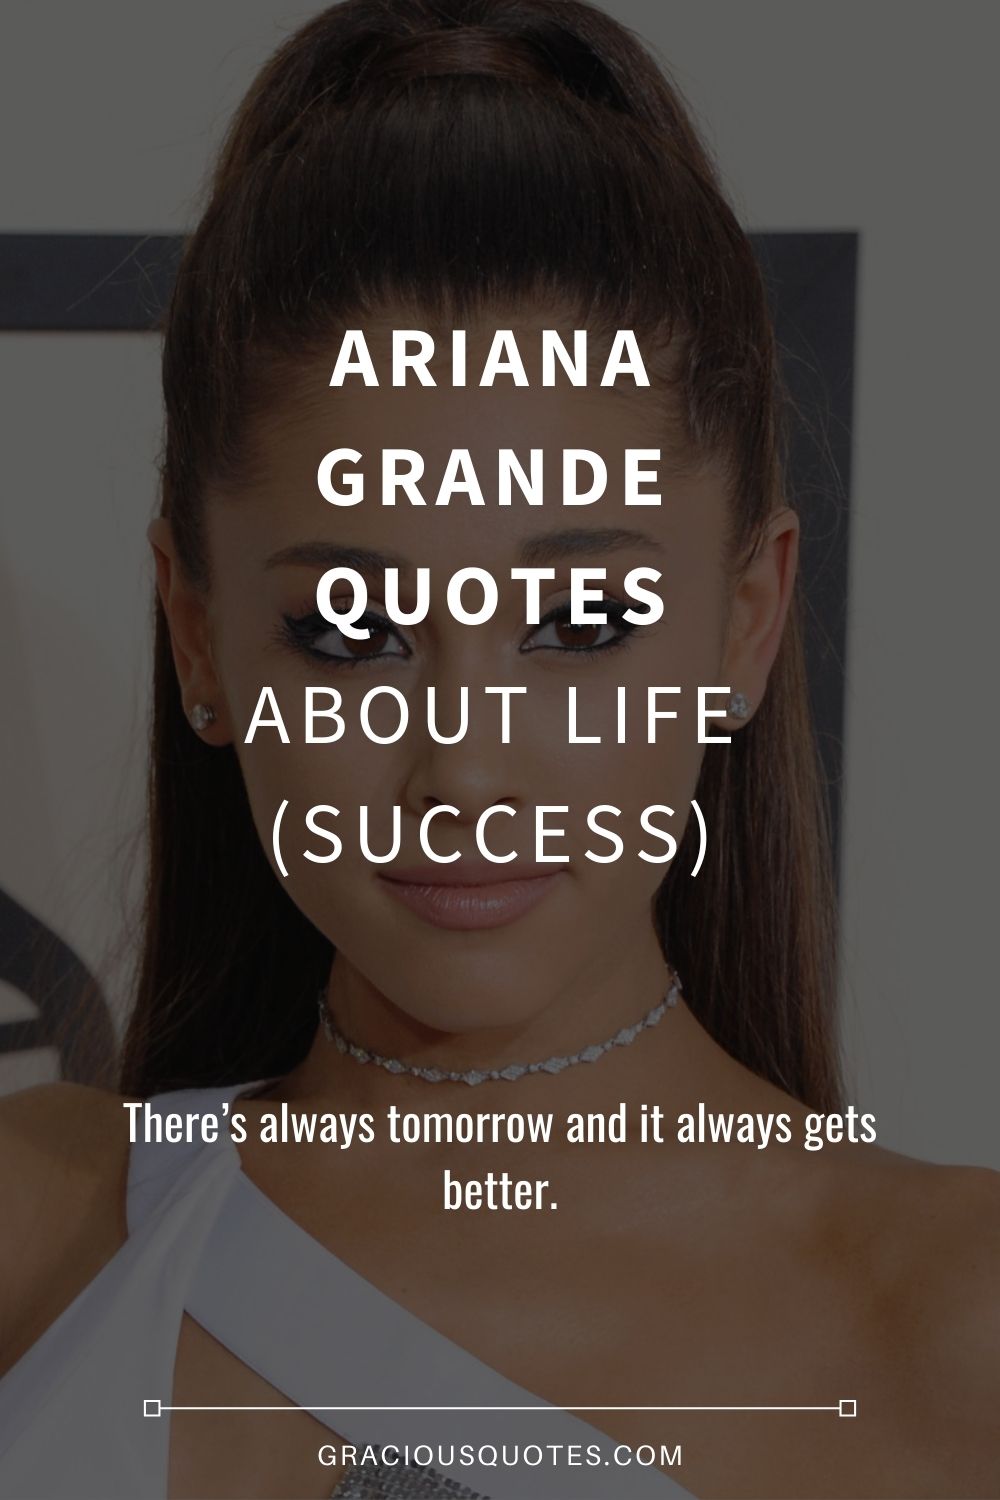 Ariana Grande Quotes About Life (SUCCESS) - Gracious Quotes